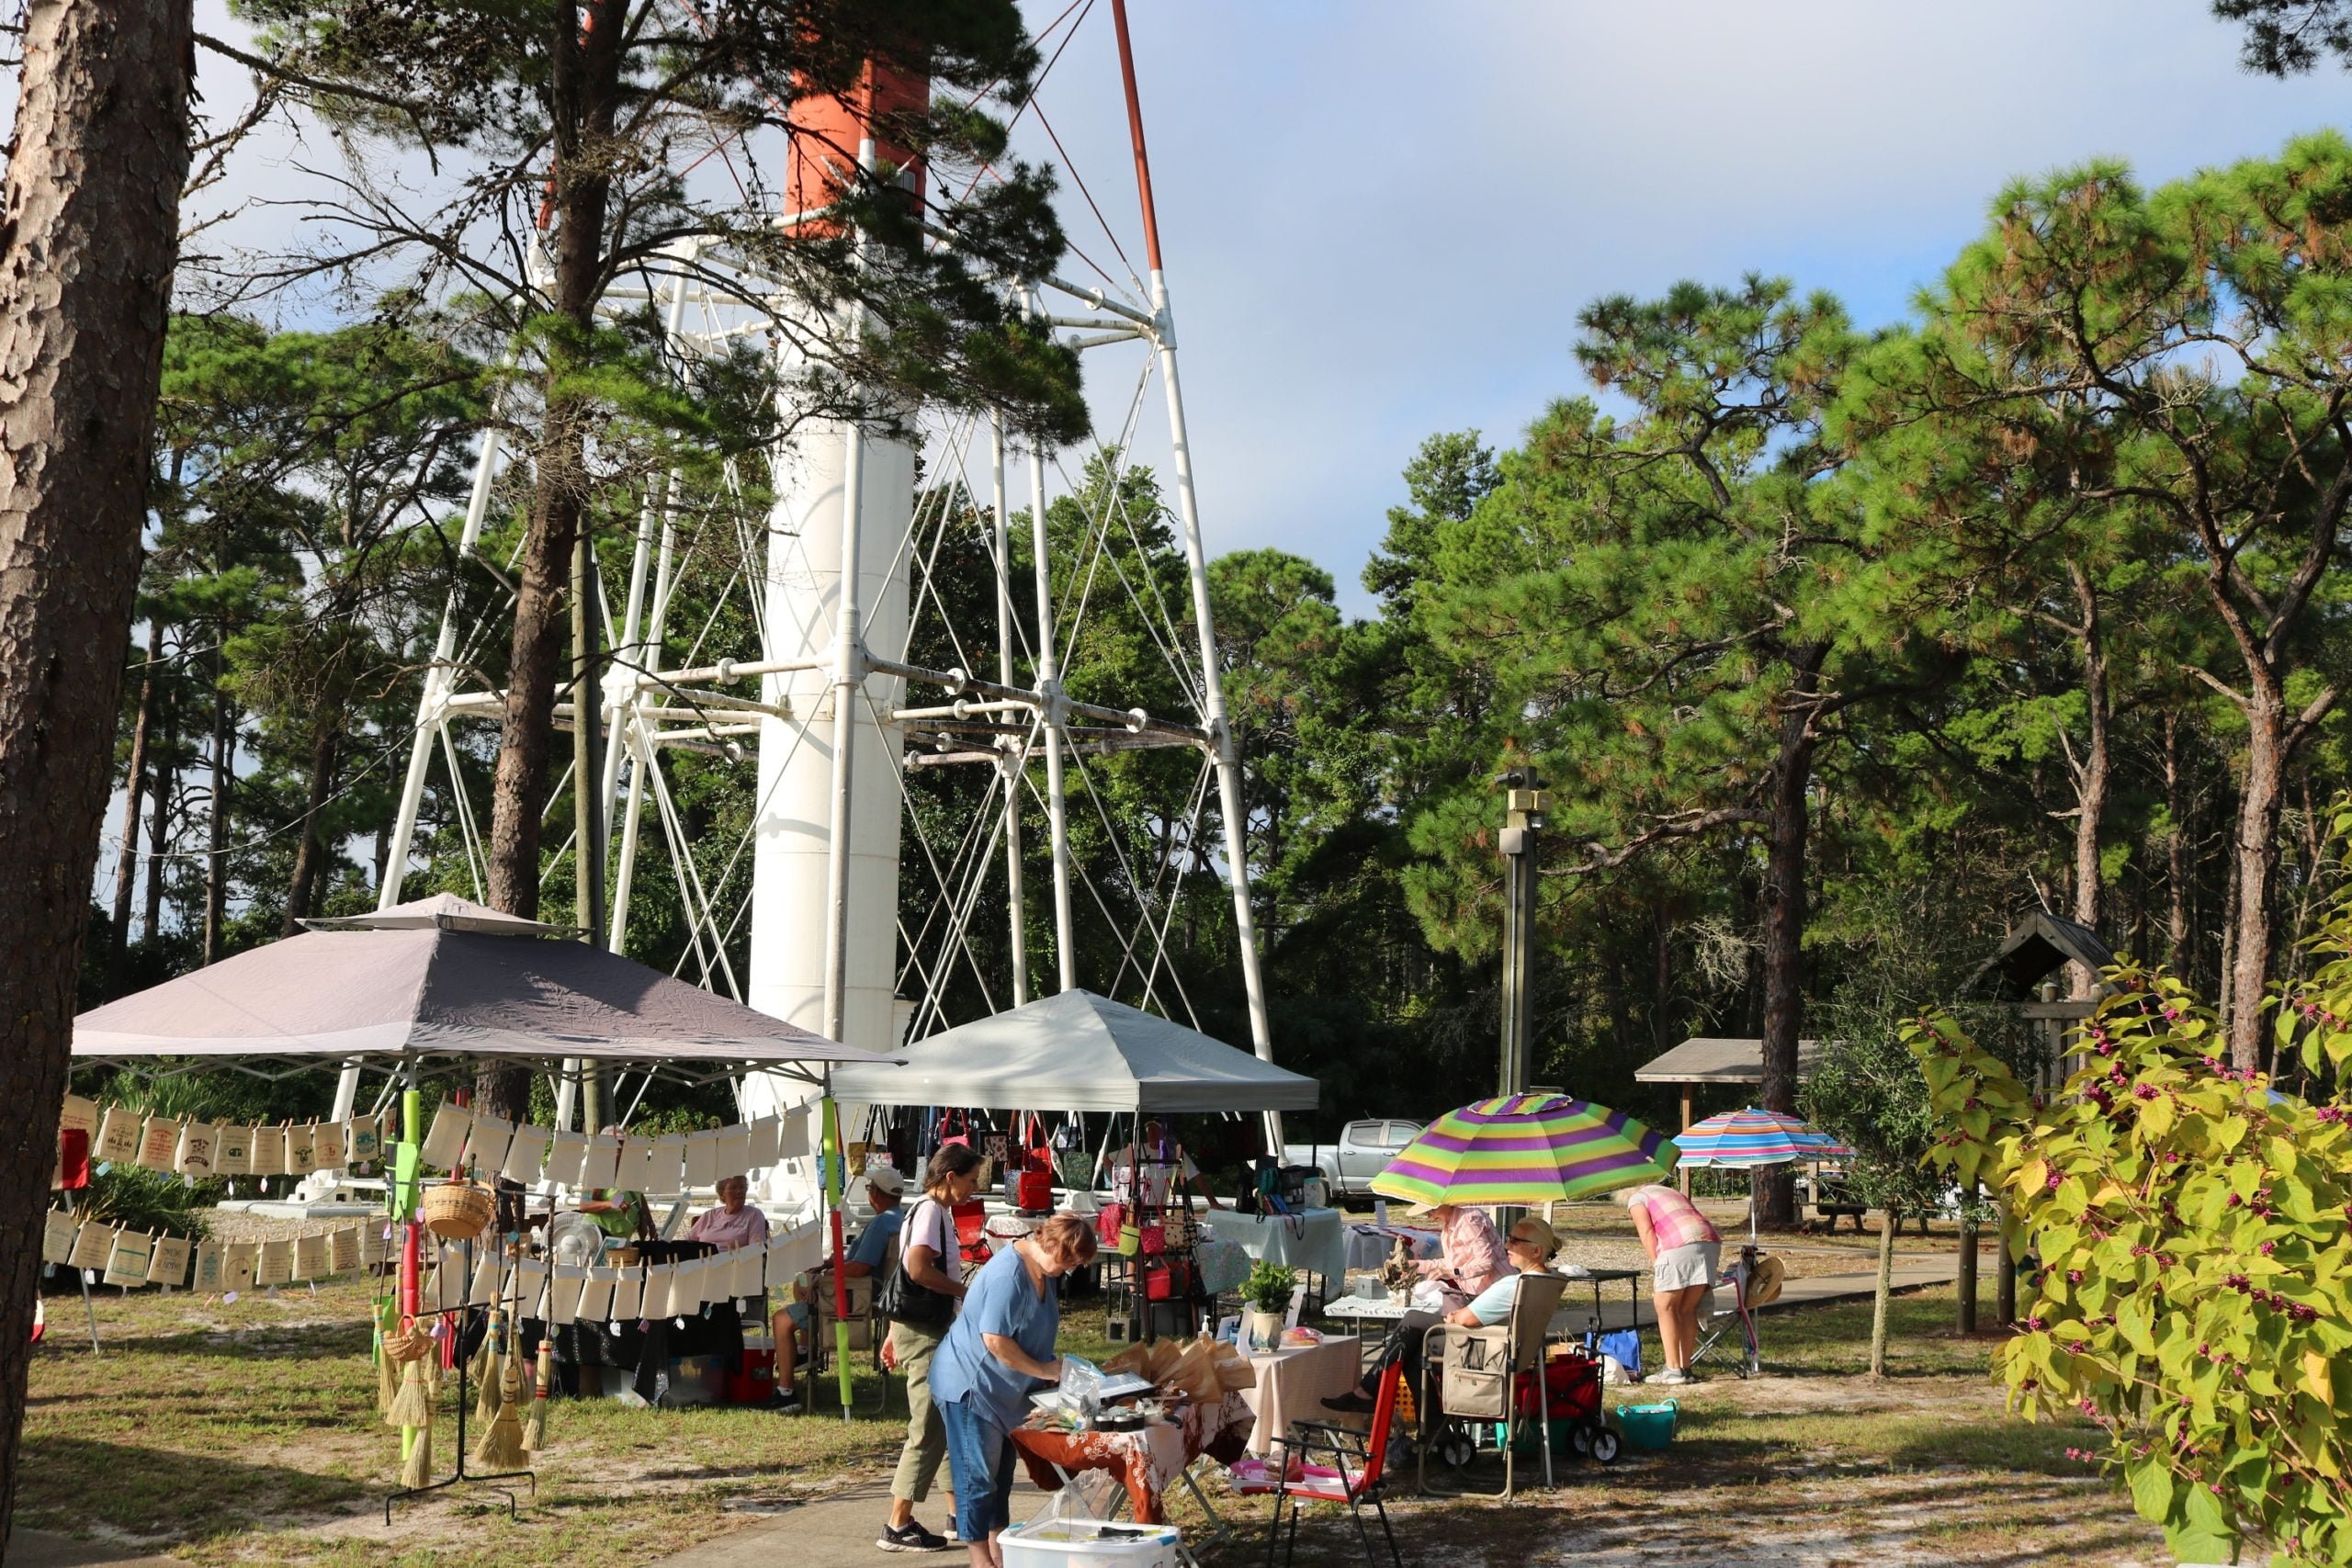 Vendor market booths at the foot of Crooked River Lighthouse